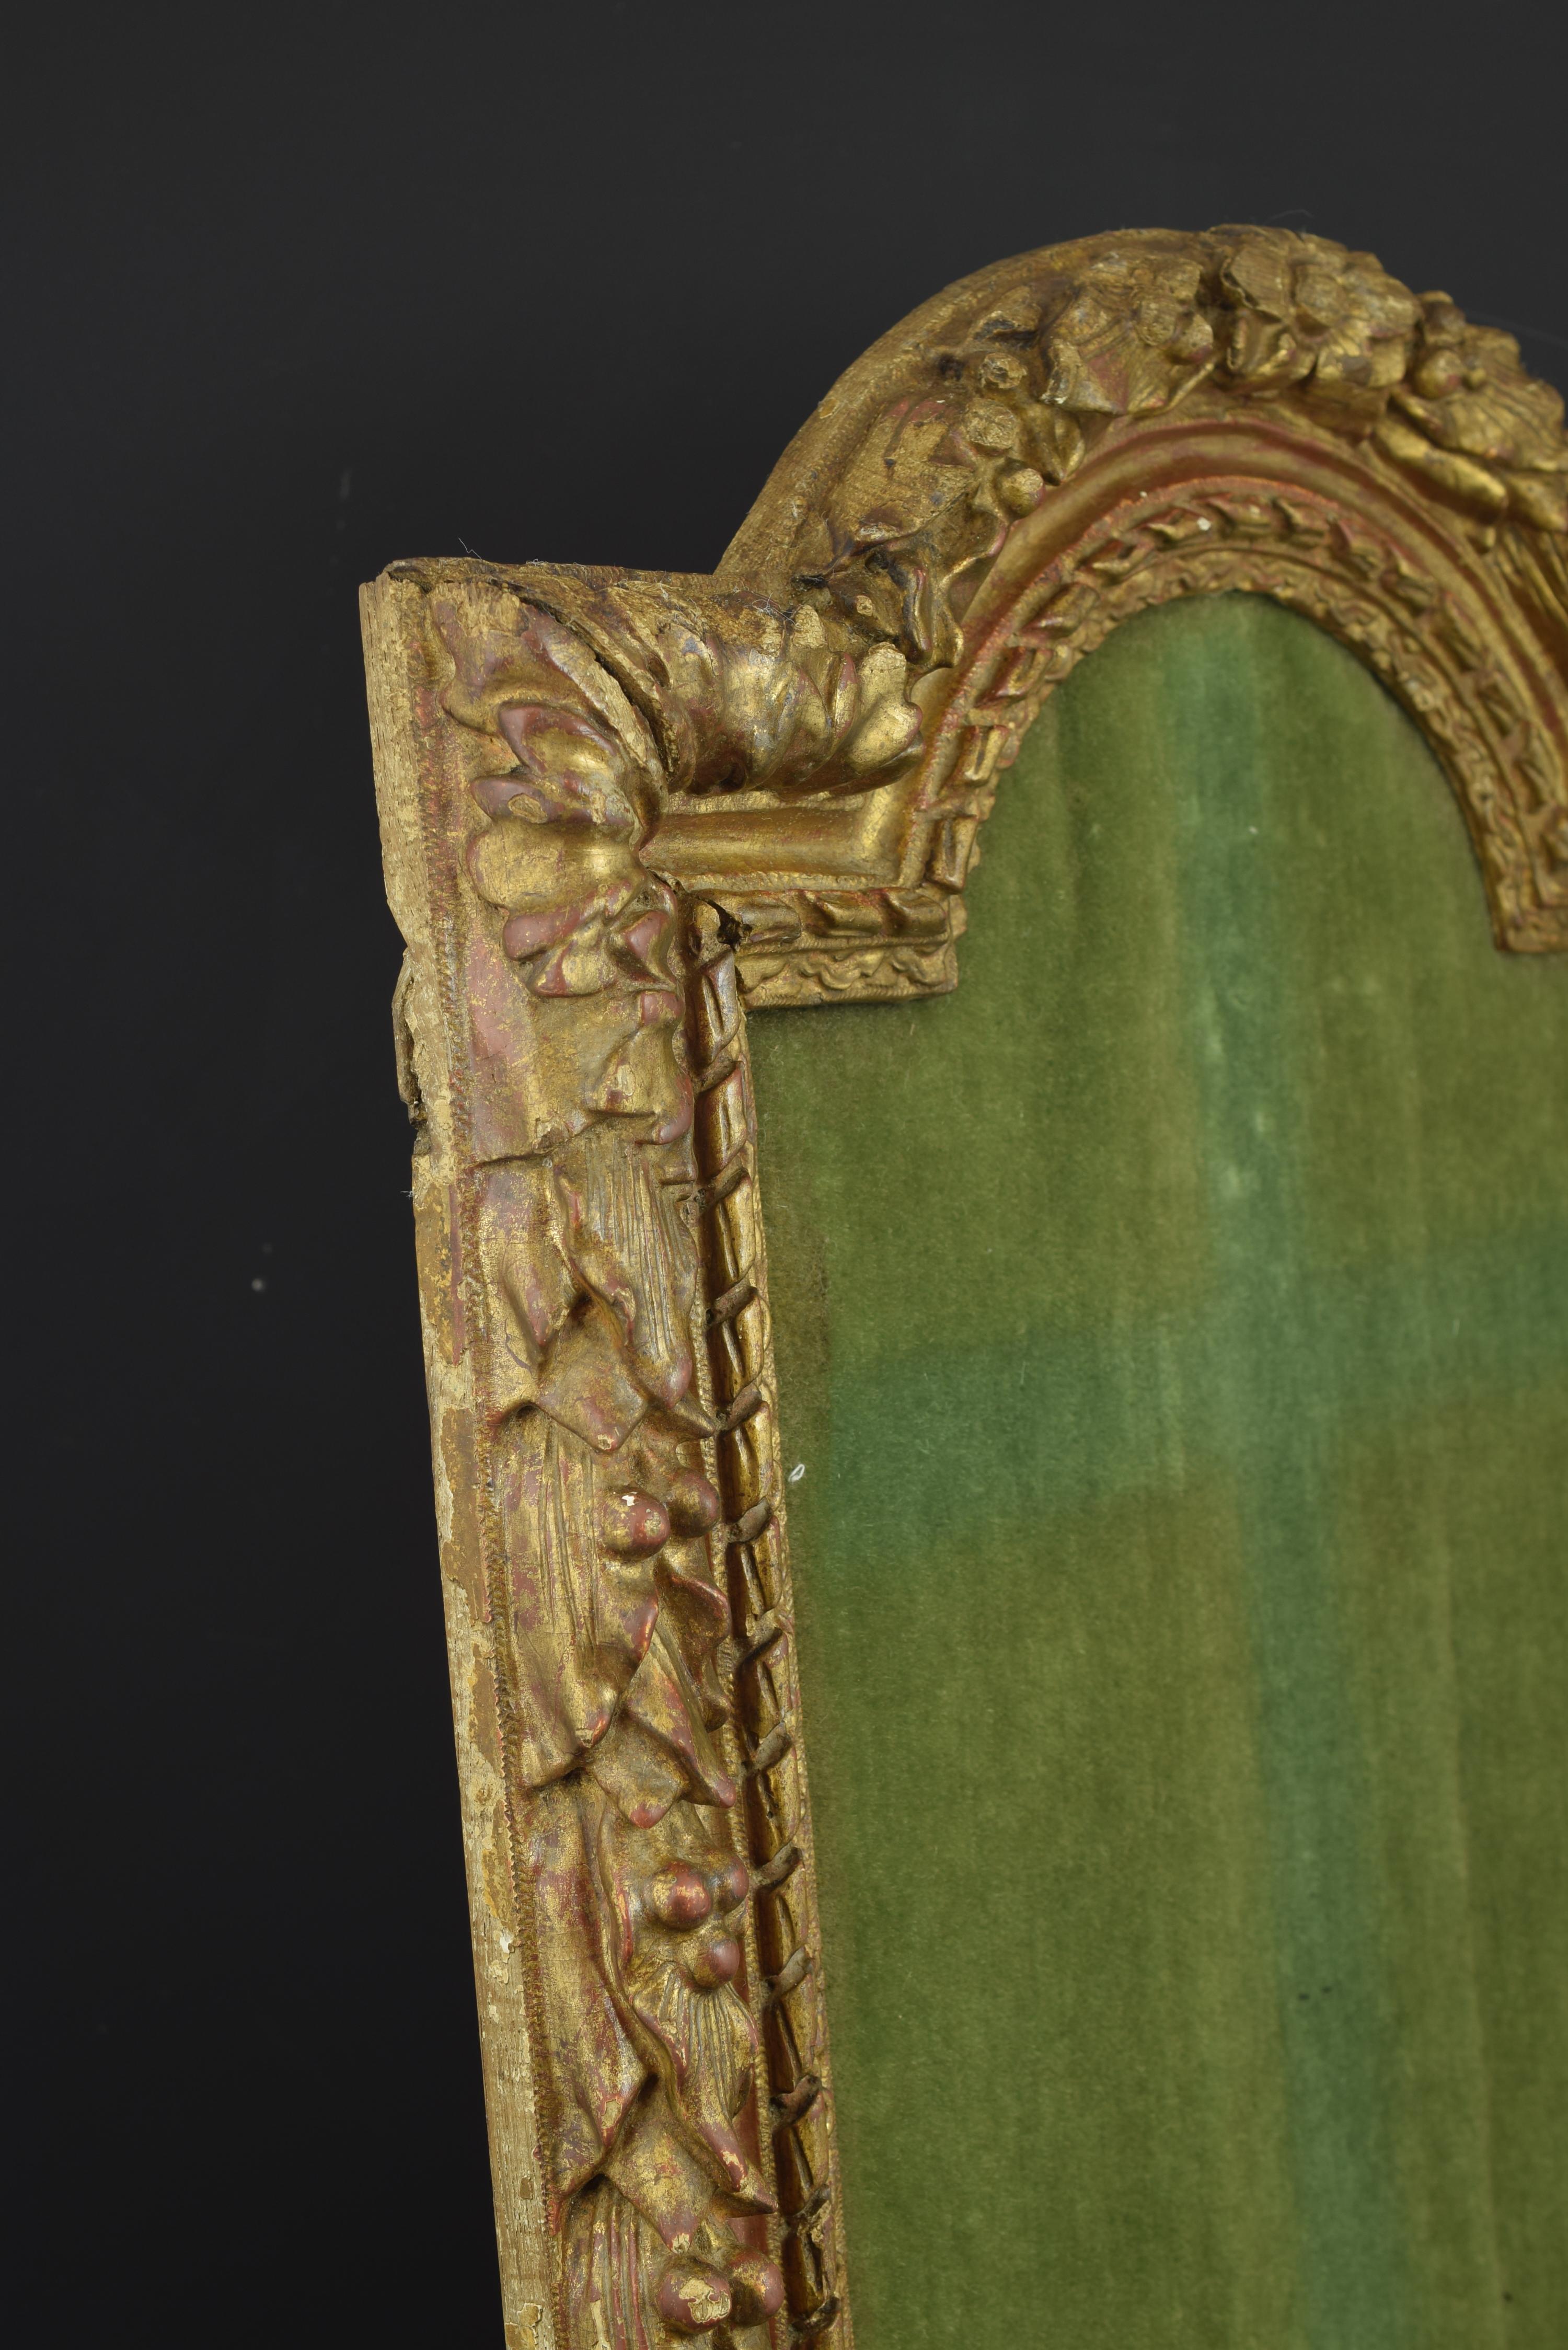 Carved and gilded wood frame, 18th century.
Rectangular frame with upper edge curved to the outside decorated with carved moldings with vegetal elements and chain stitches. A vegetable motif, at the bottom, breaks slightly with the straight line